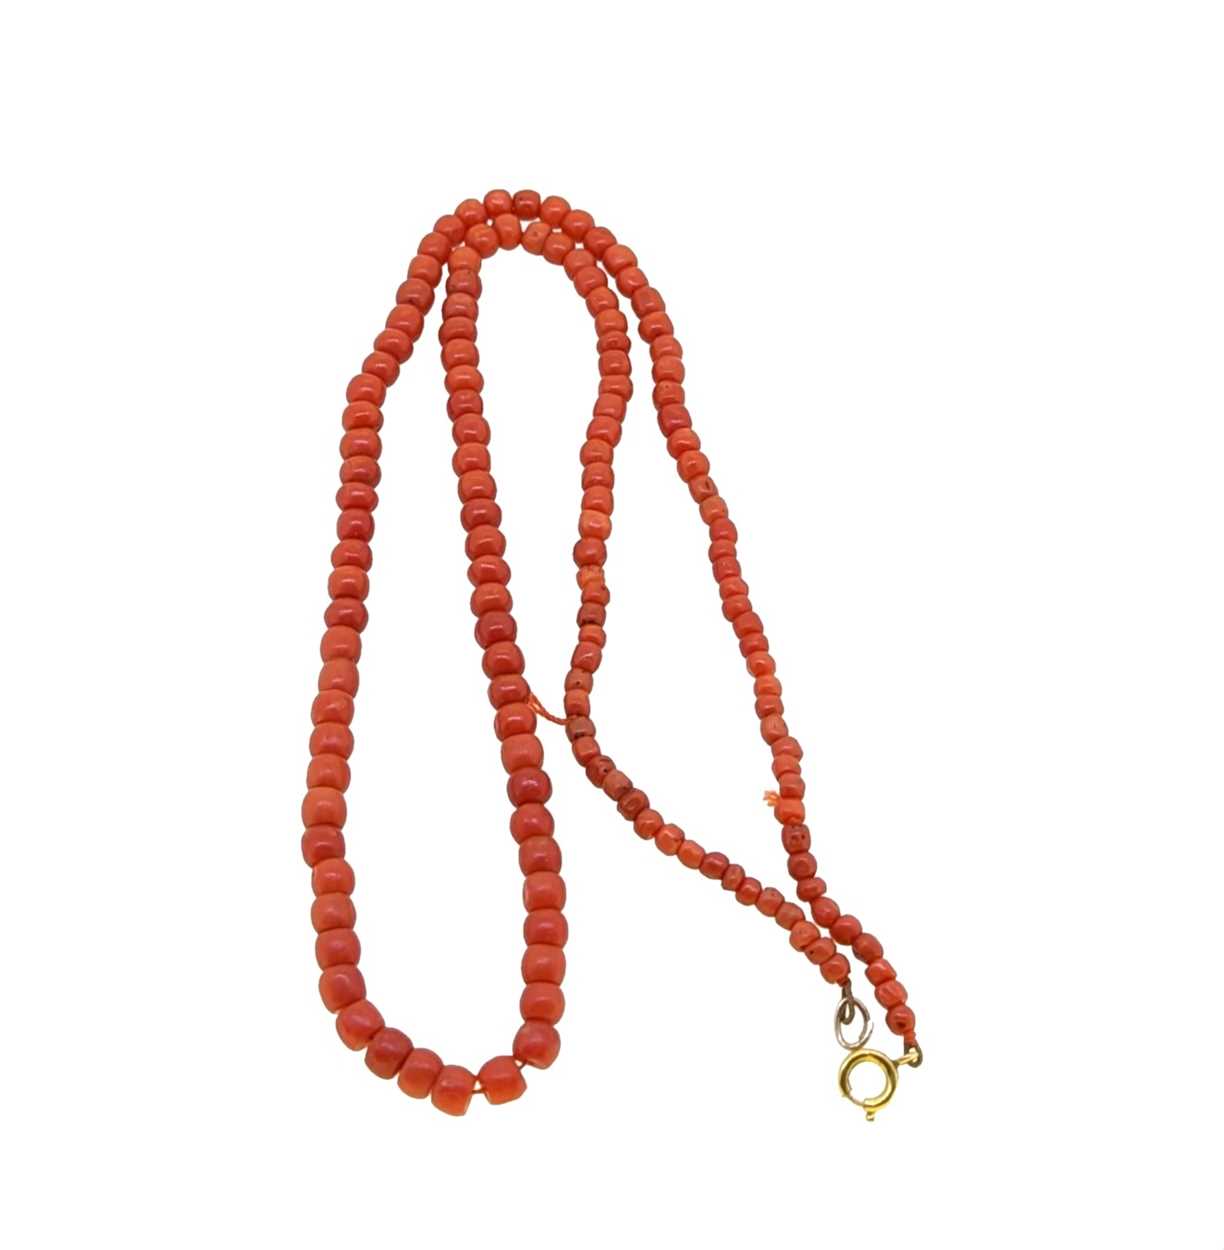 Two coral bead necklaces, - Image 3 of 3